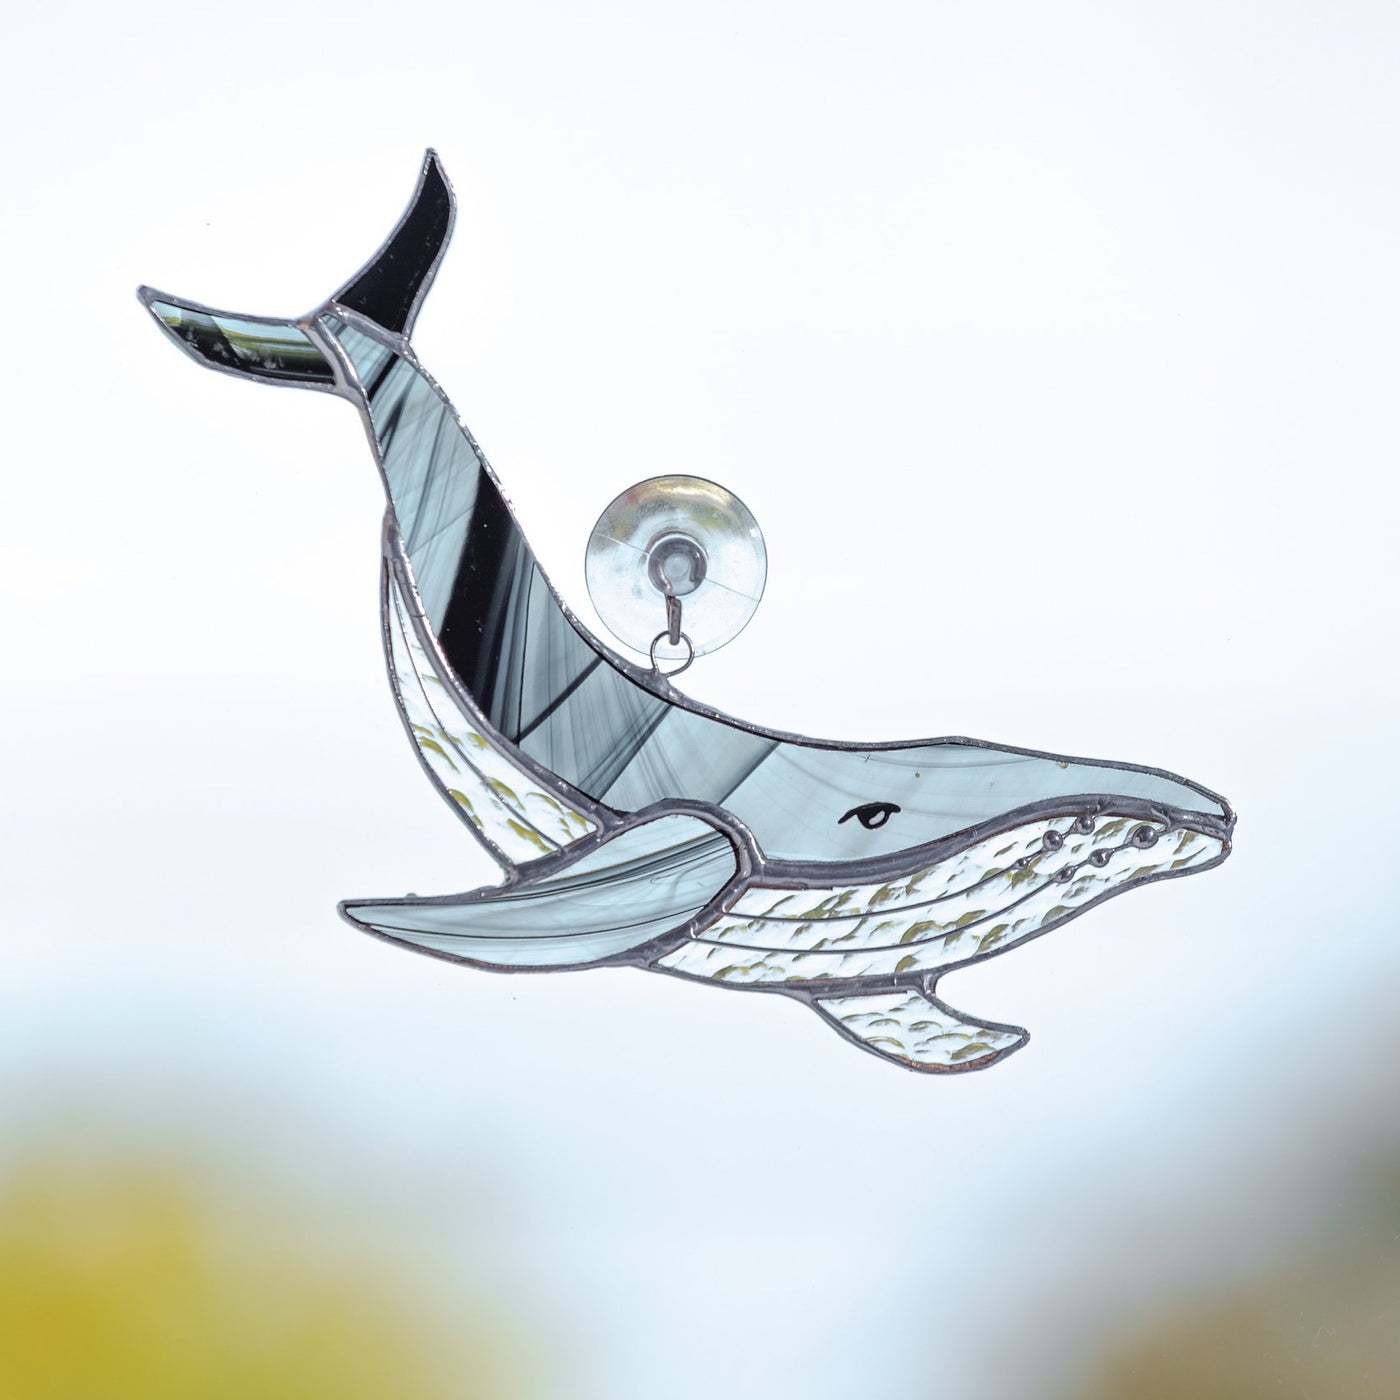 Stained glass suncatcher of a black and grey whale with clear lower part and its tail up